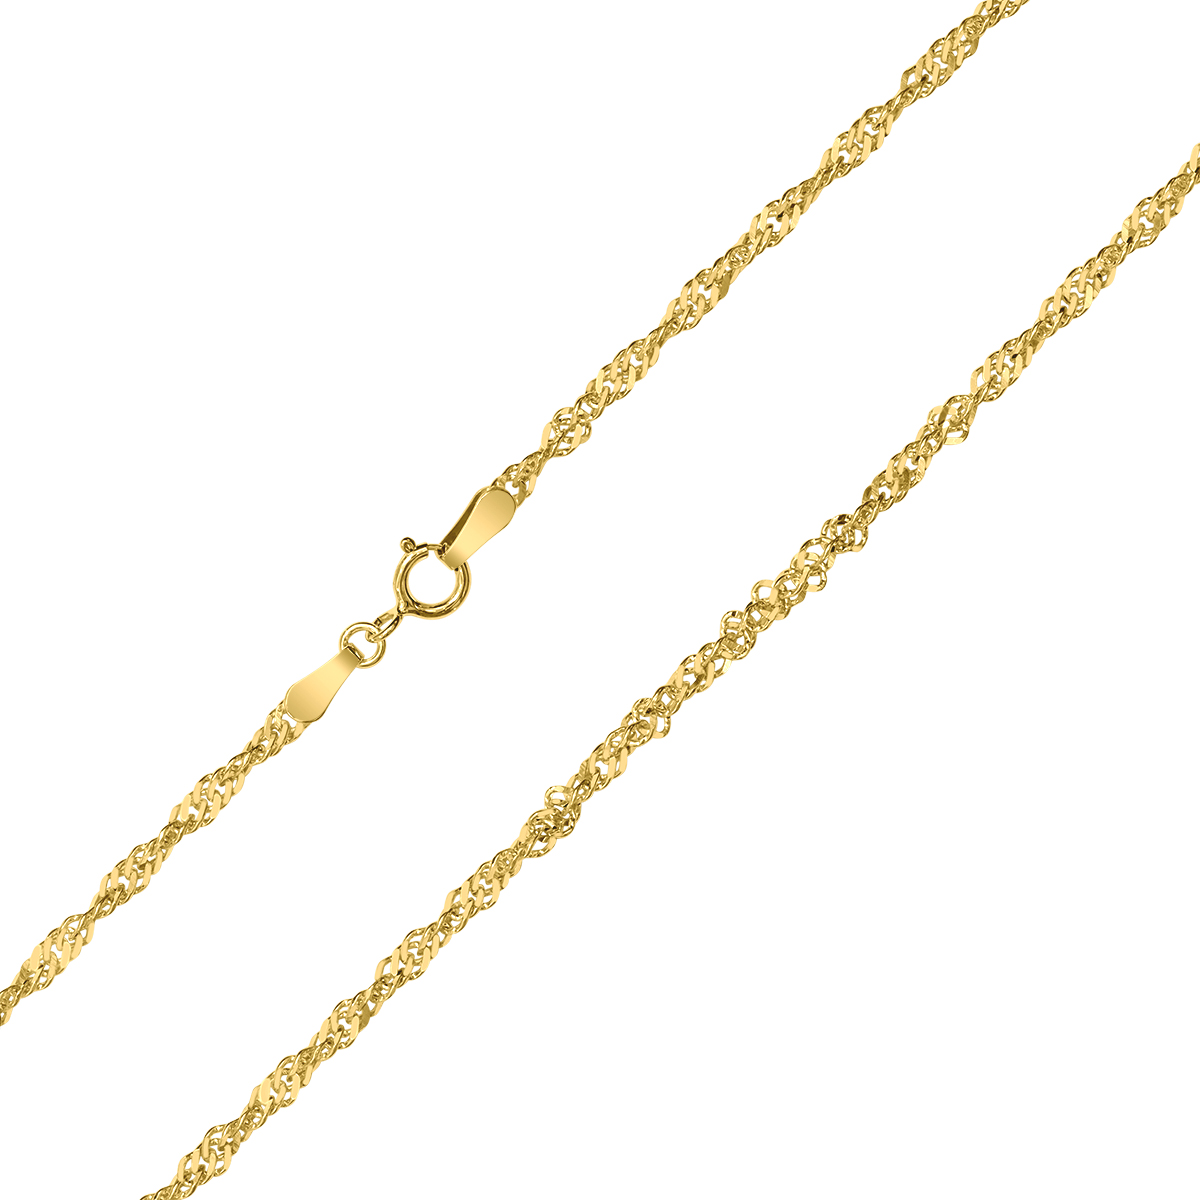 10K Yellow Gold 2.2mm Singapore Chain with Spring Ring Clasp - 22 Inch